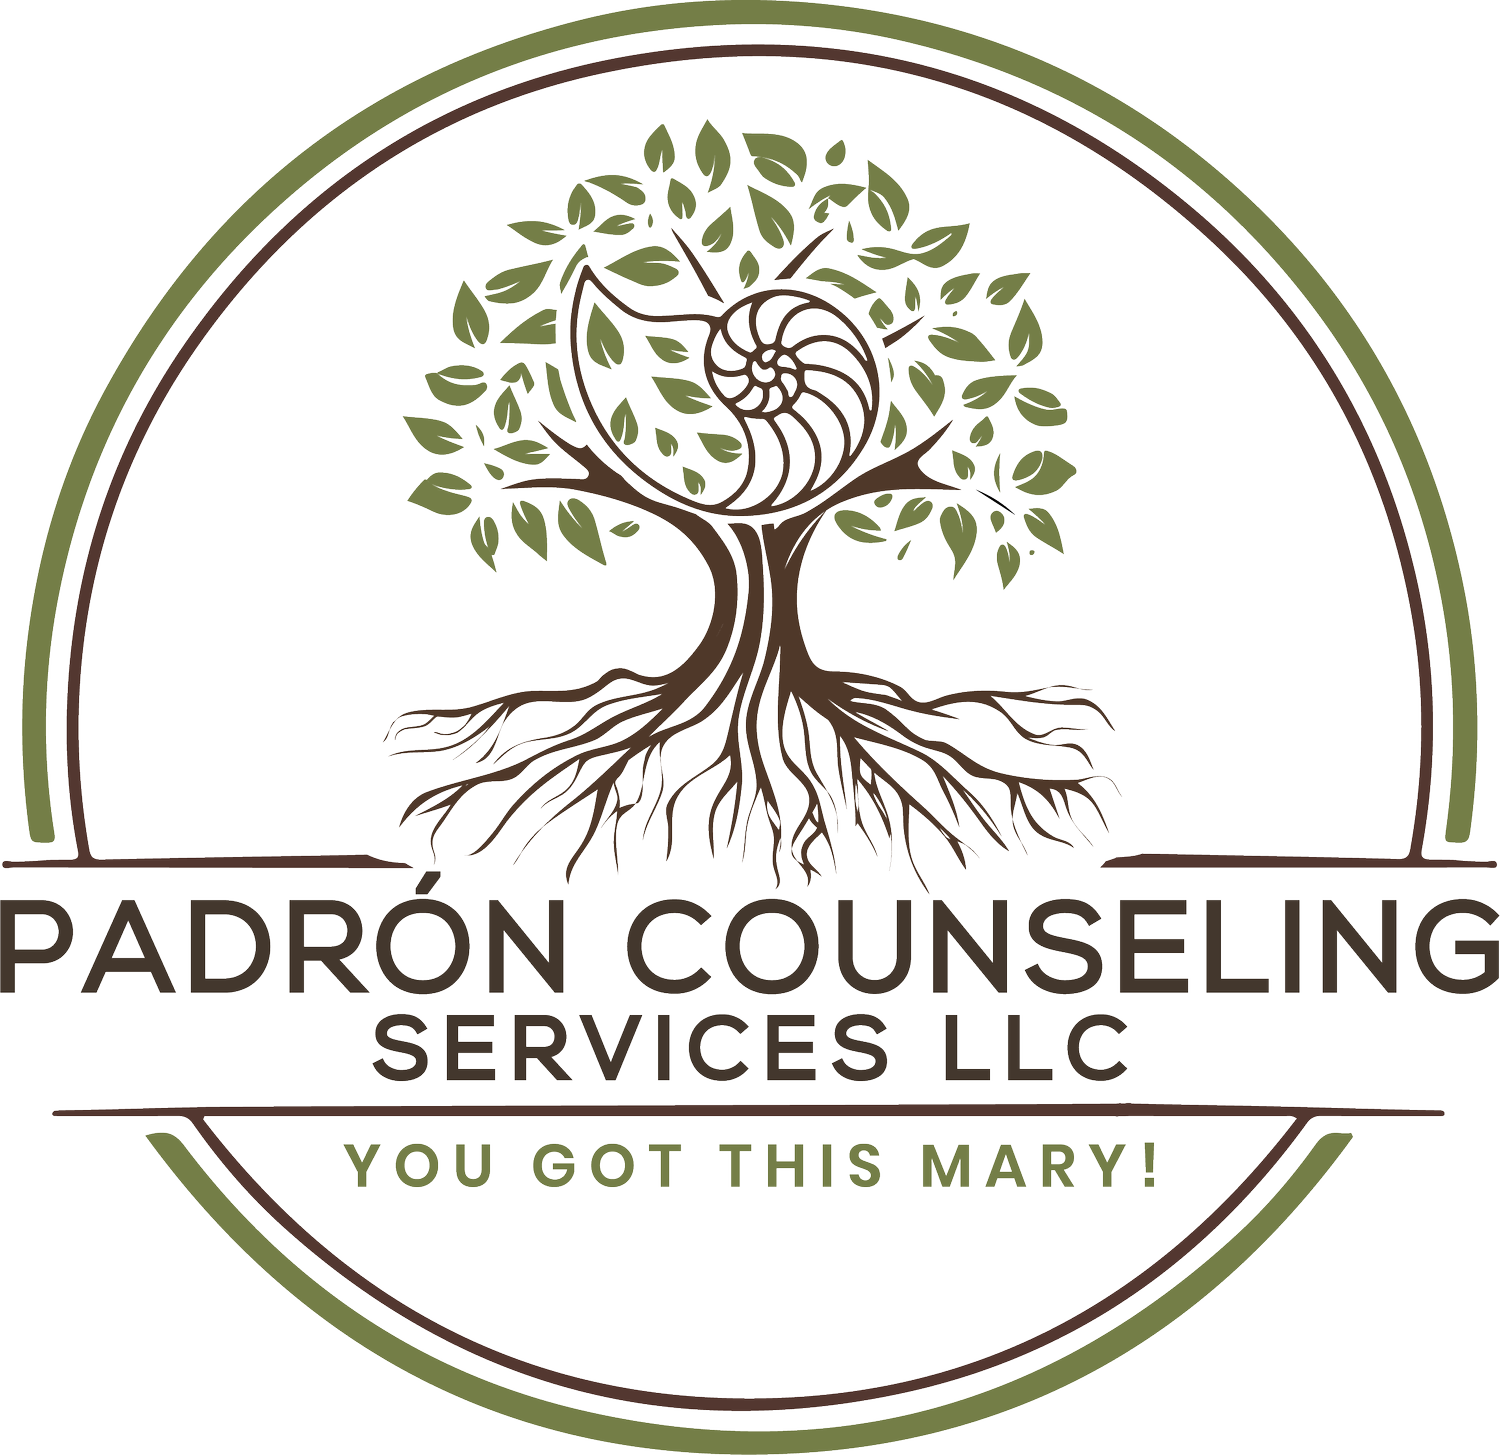 Padron Counseling Services